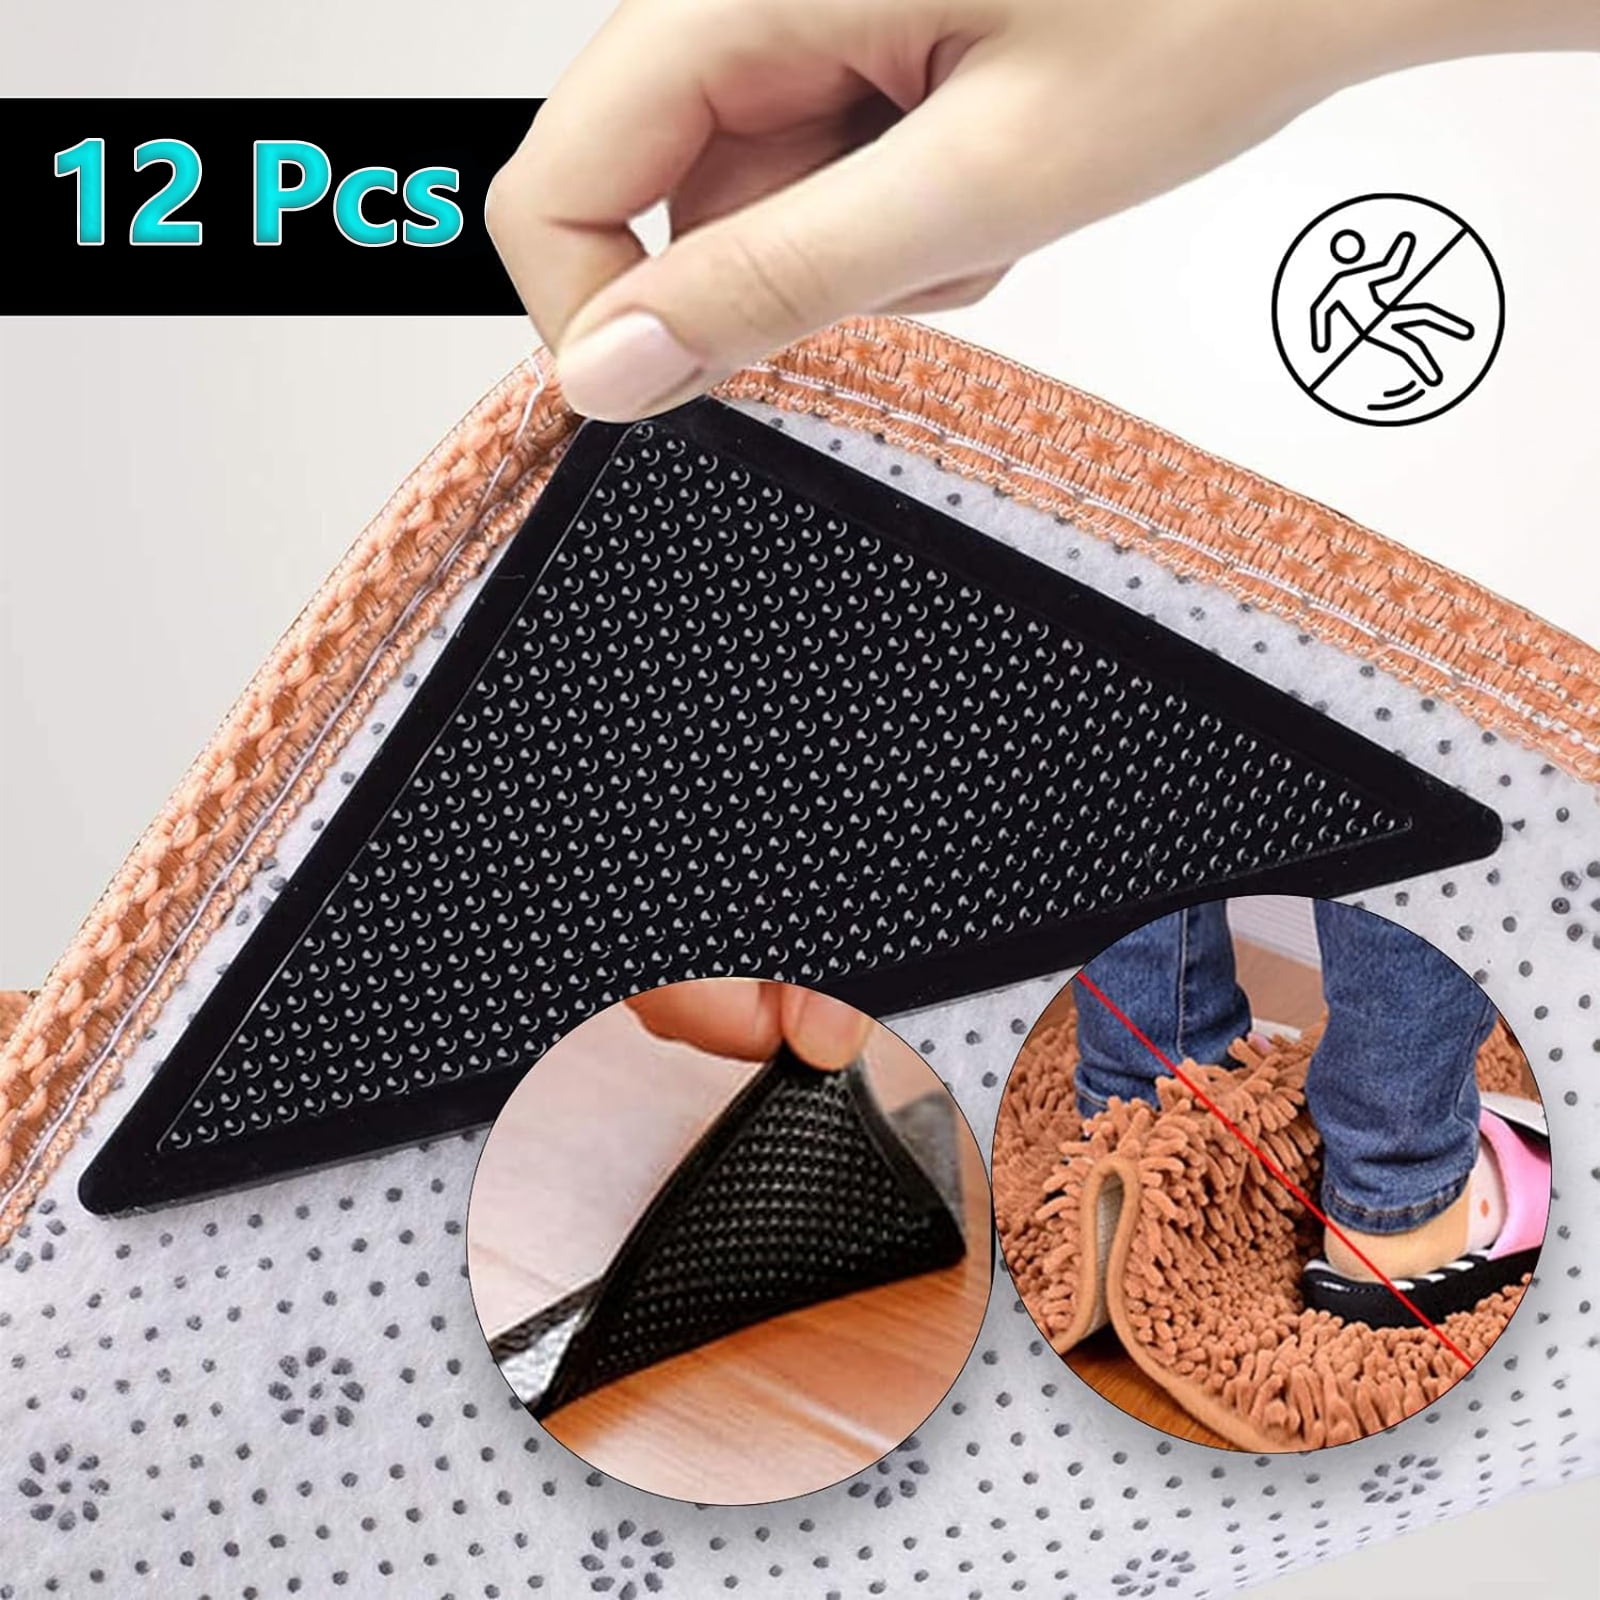 4 x Rug Carpet Mat Grippers Non Slip Anti Skid Reusable Washable Silicone Grip, Black